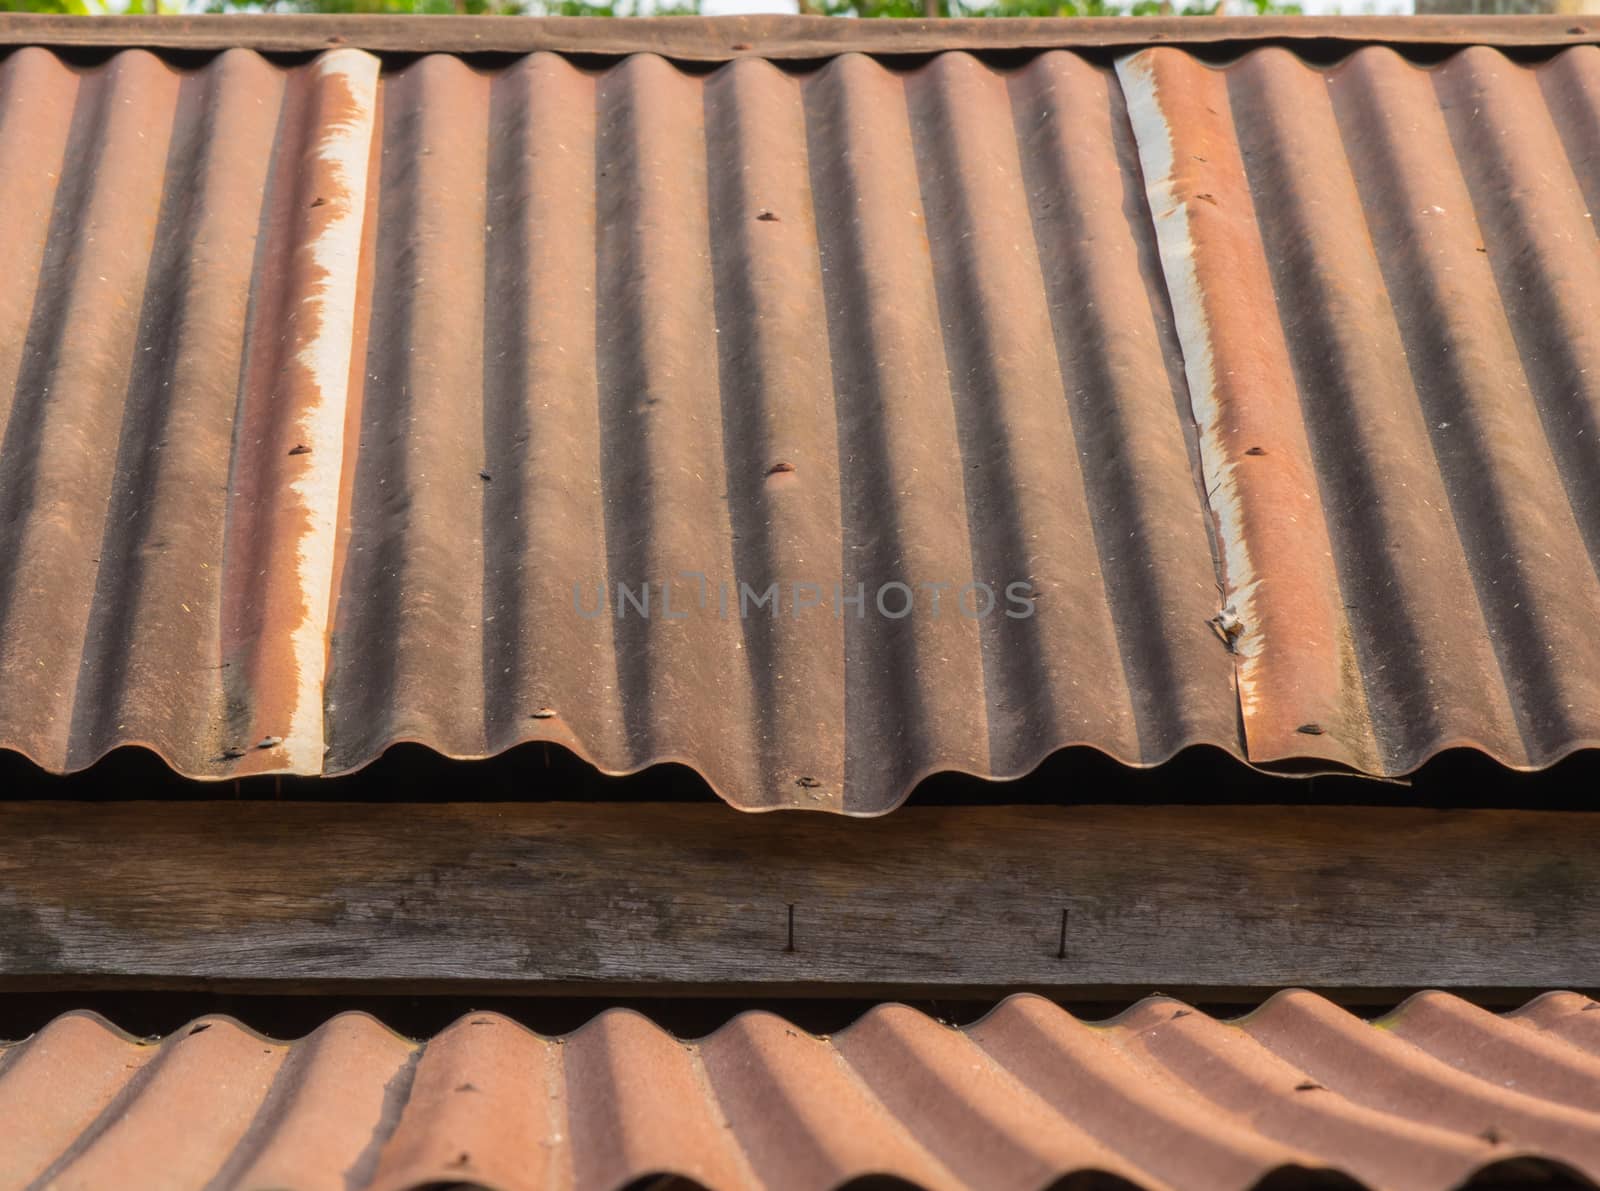 A Roof rusty corrugated iron metal texture by peerapixs